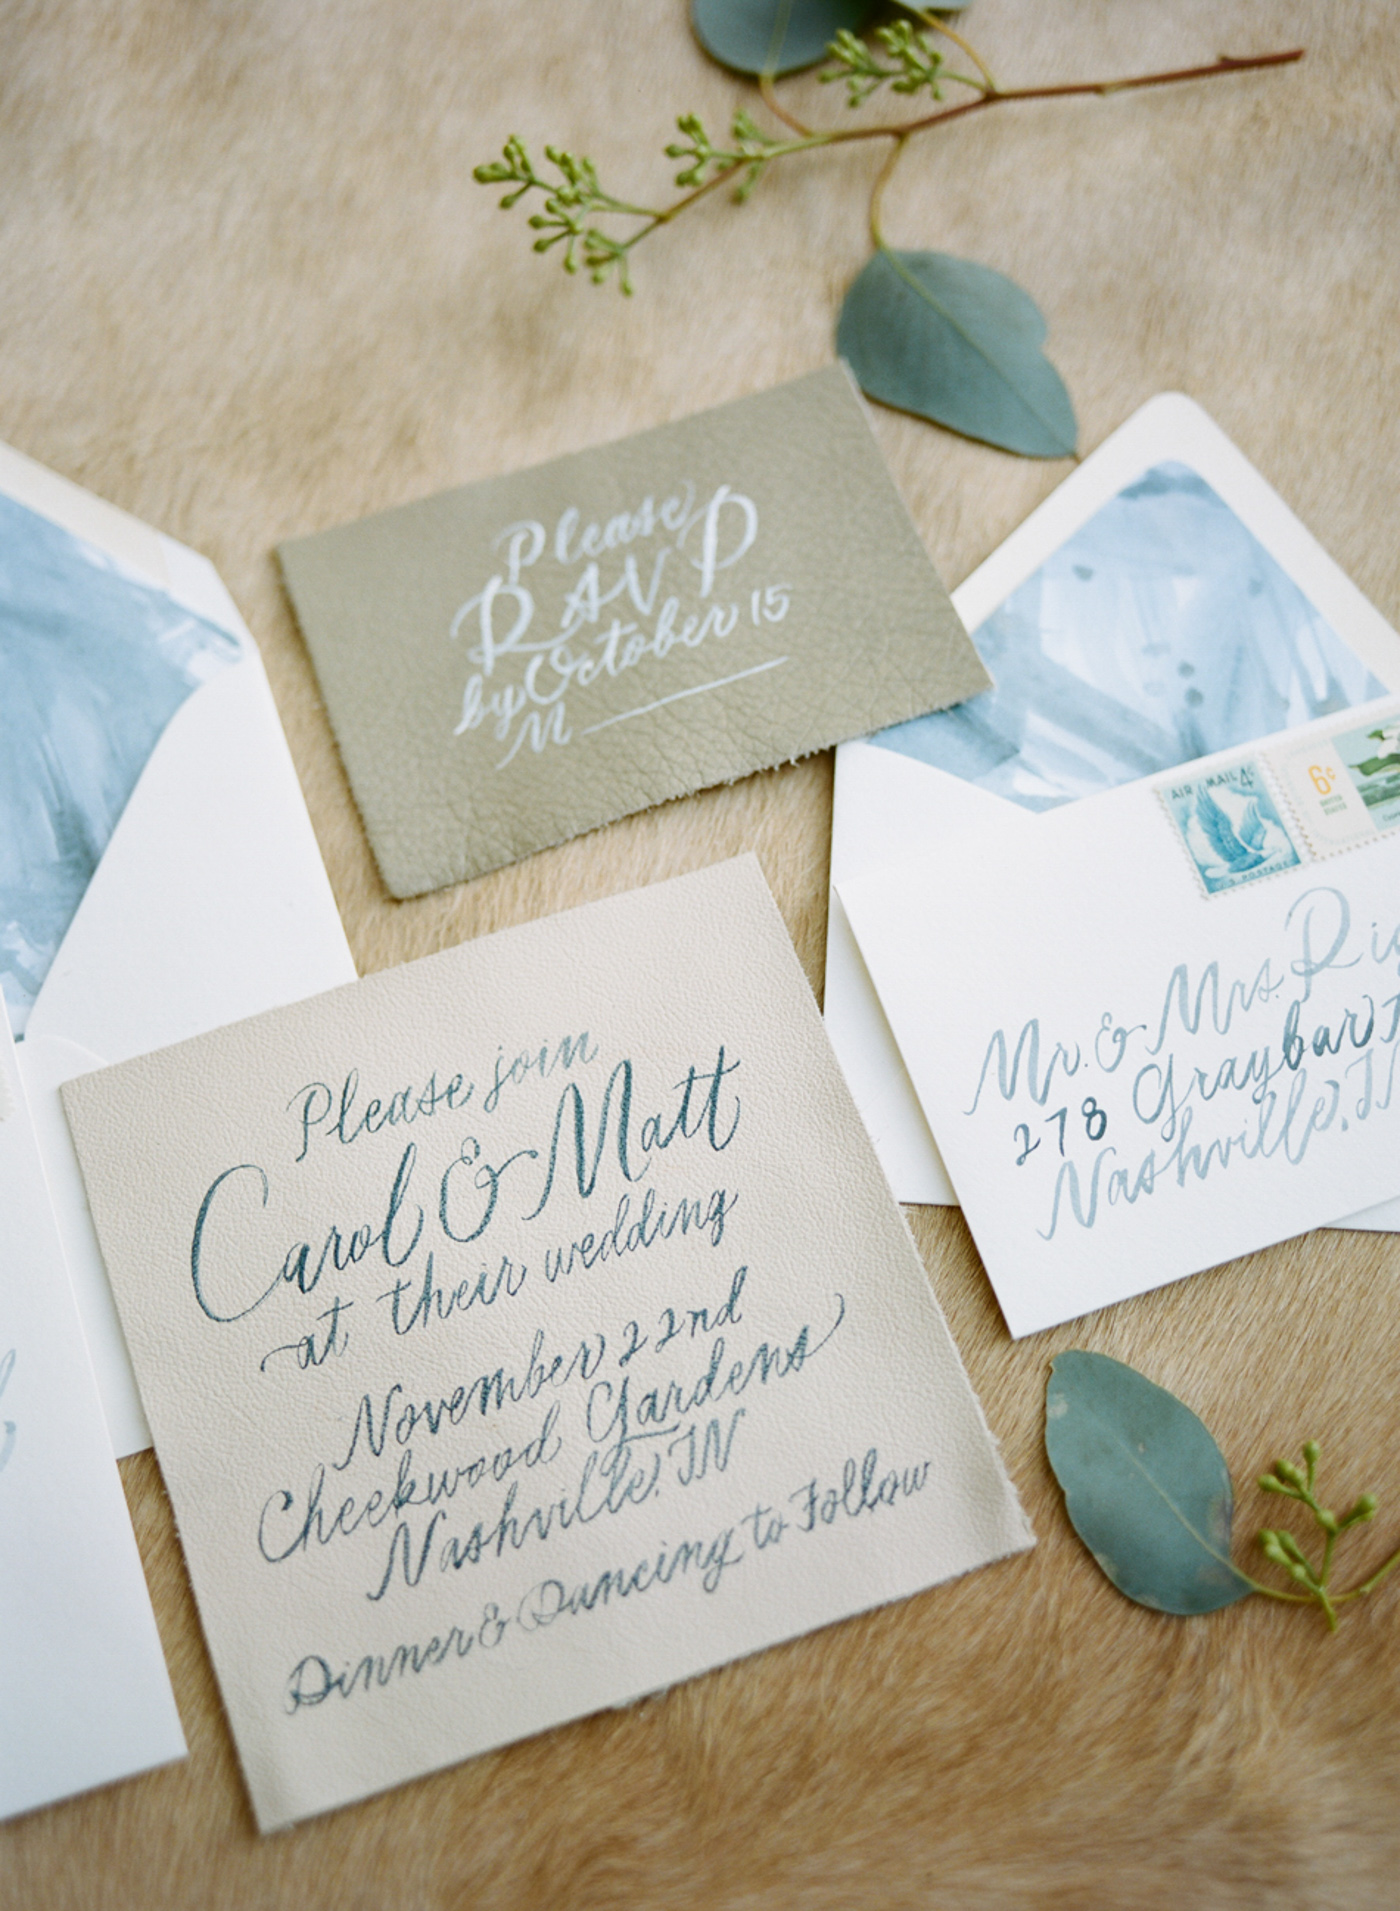 Wedding stationery design,
Koby Brown Photography,
Tennessee Wedding Photographer,
Rachel and Johnny